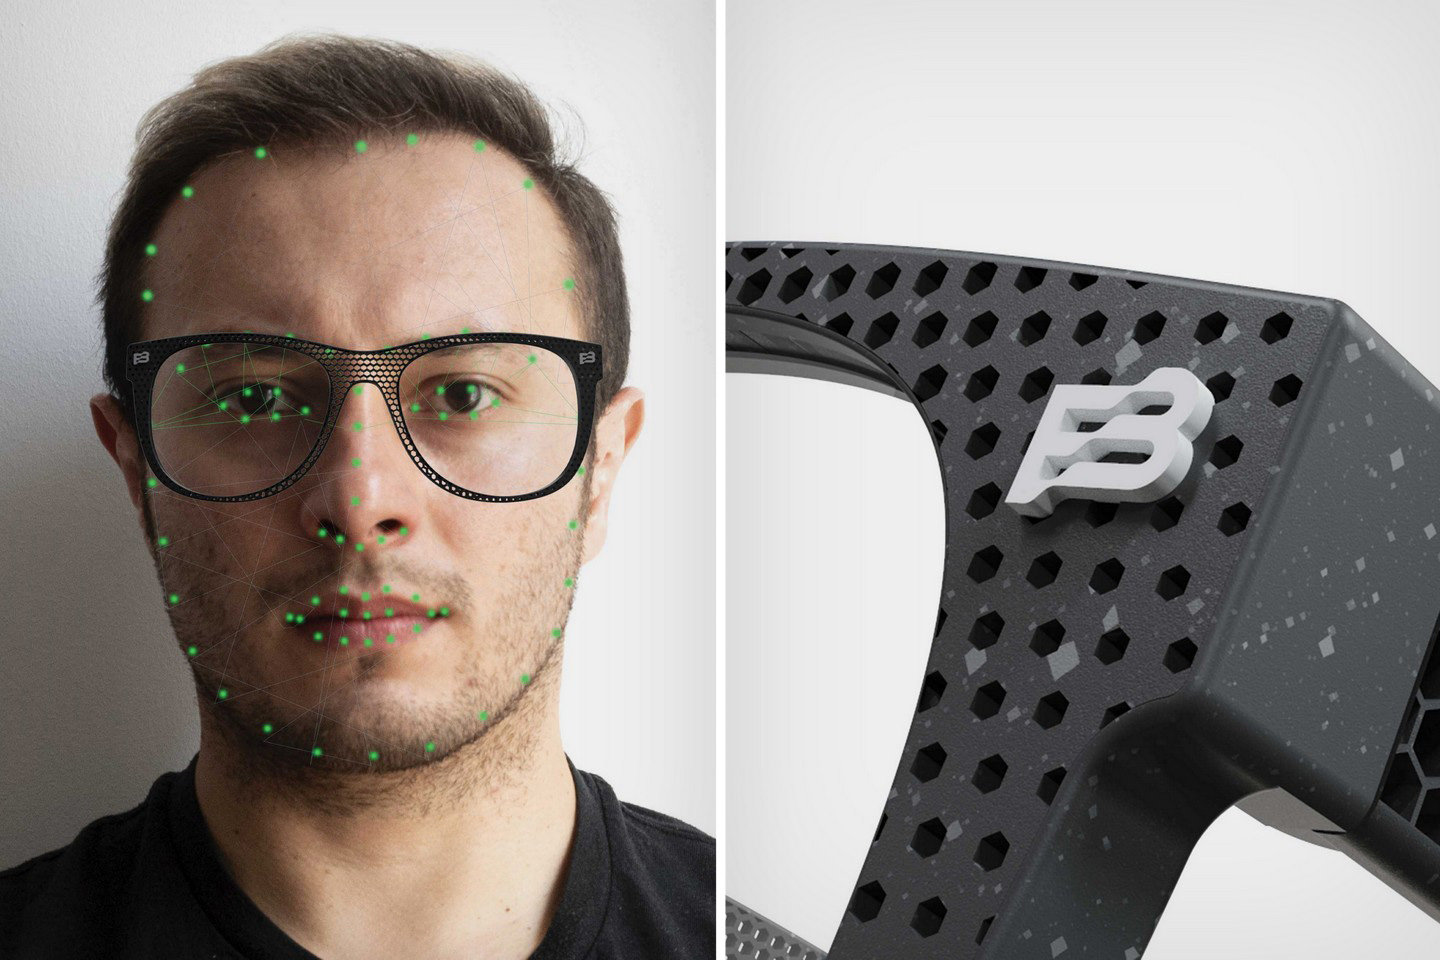 #3D-printed spectacle frames come with a hollow honeycomb design that’s made to fit your face